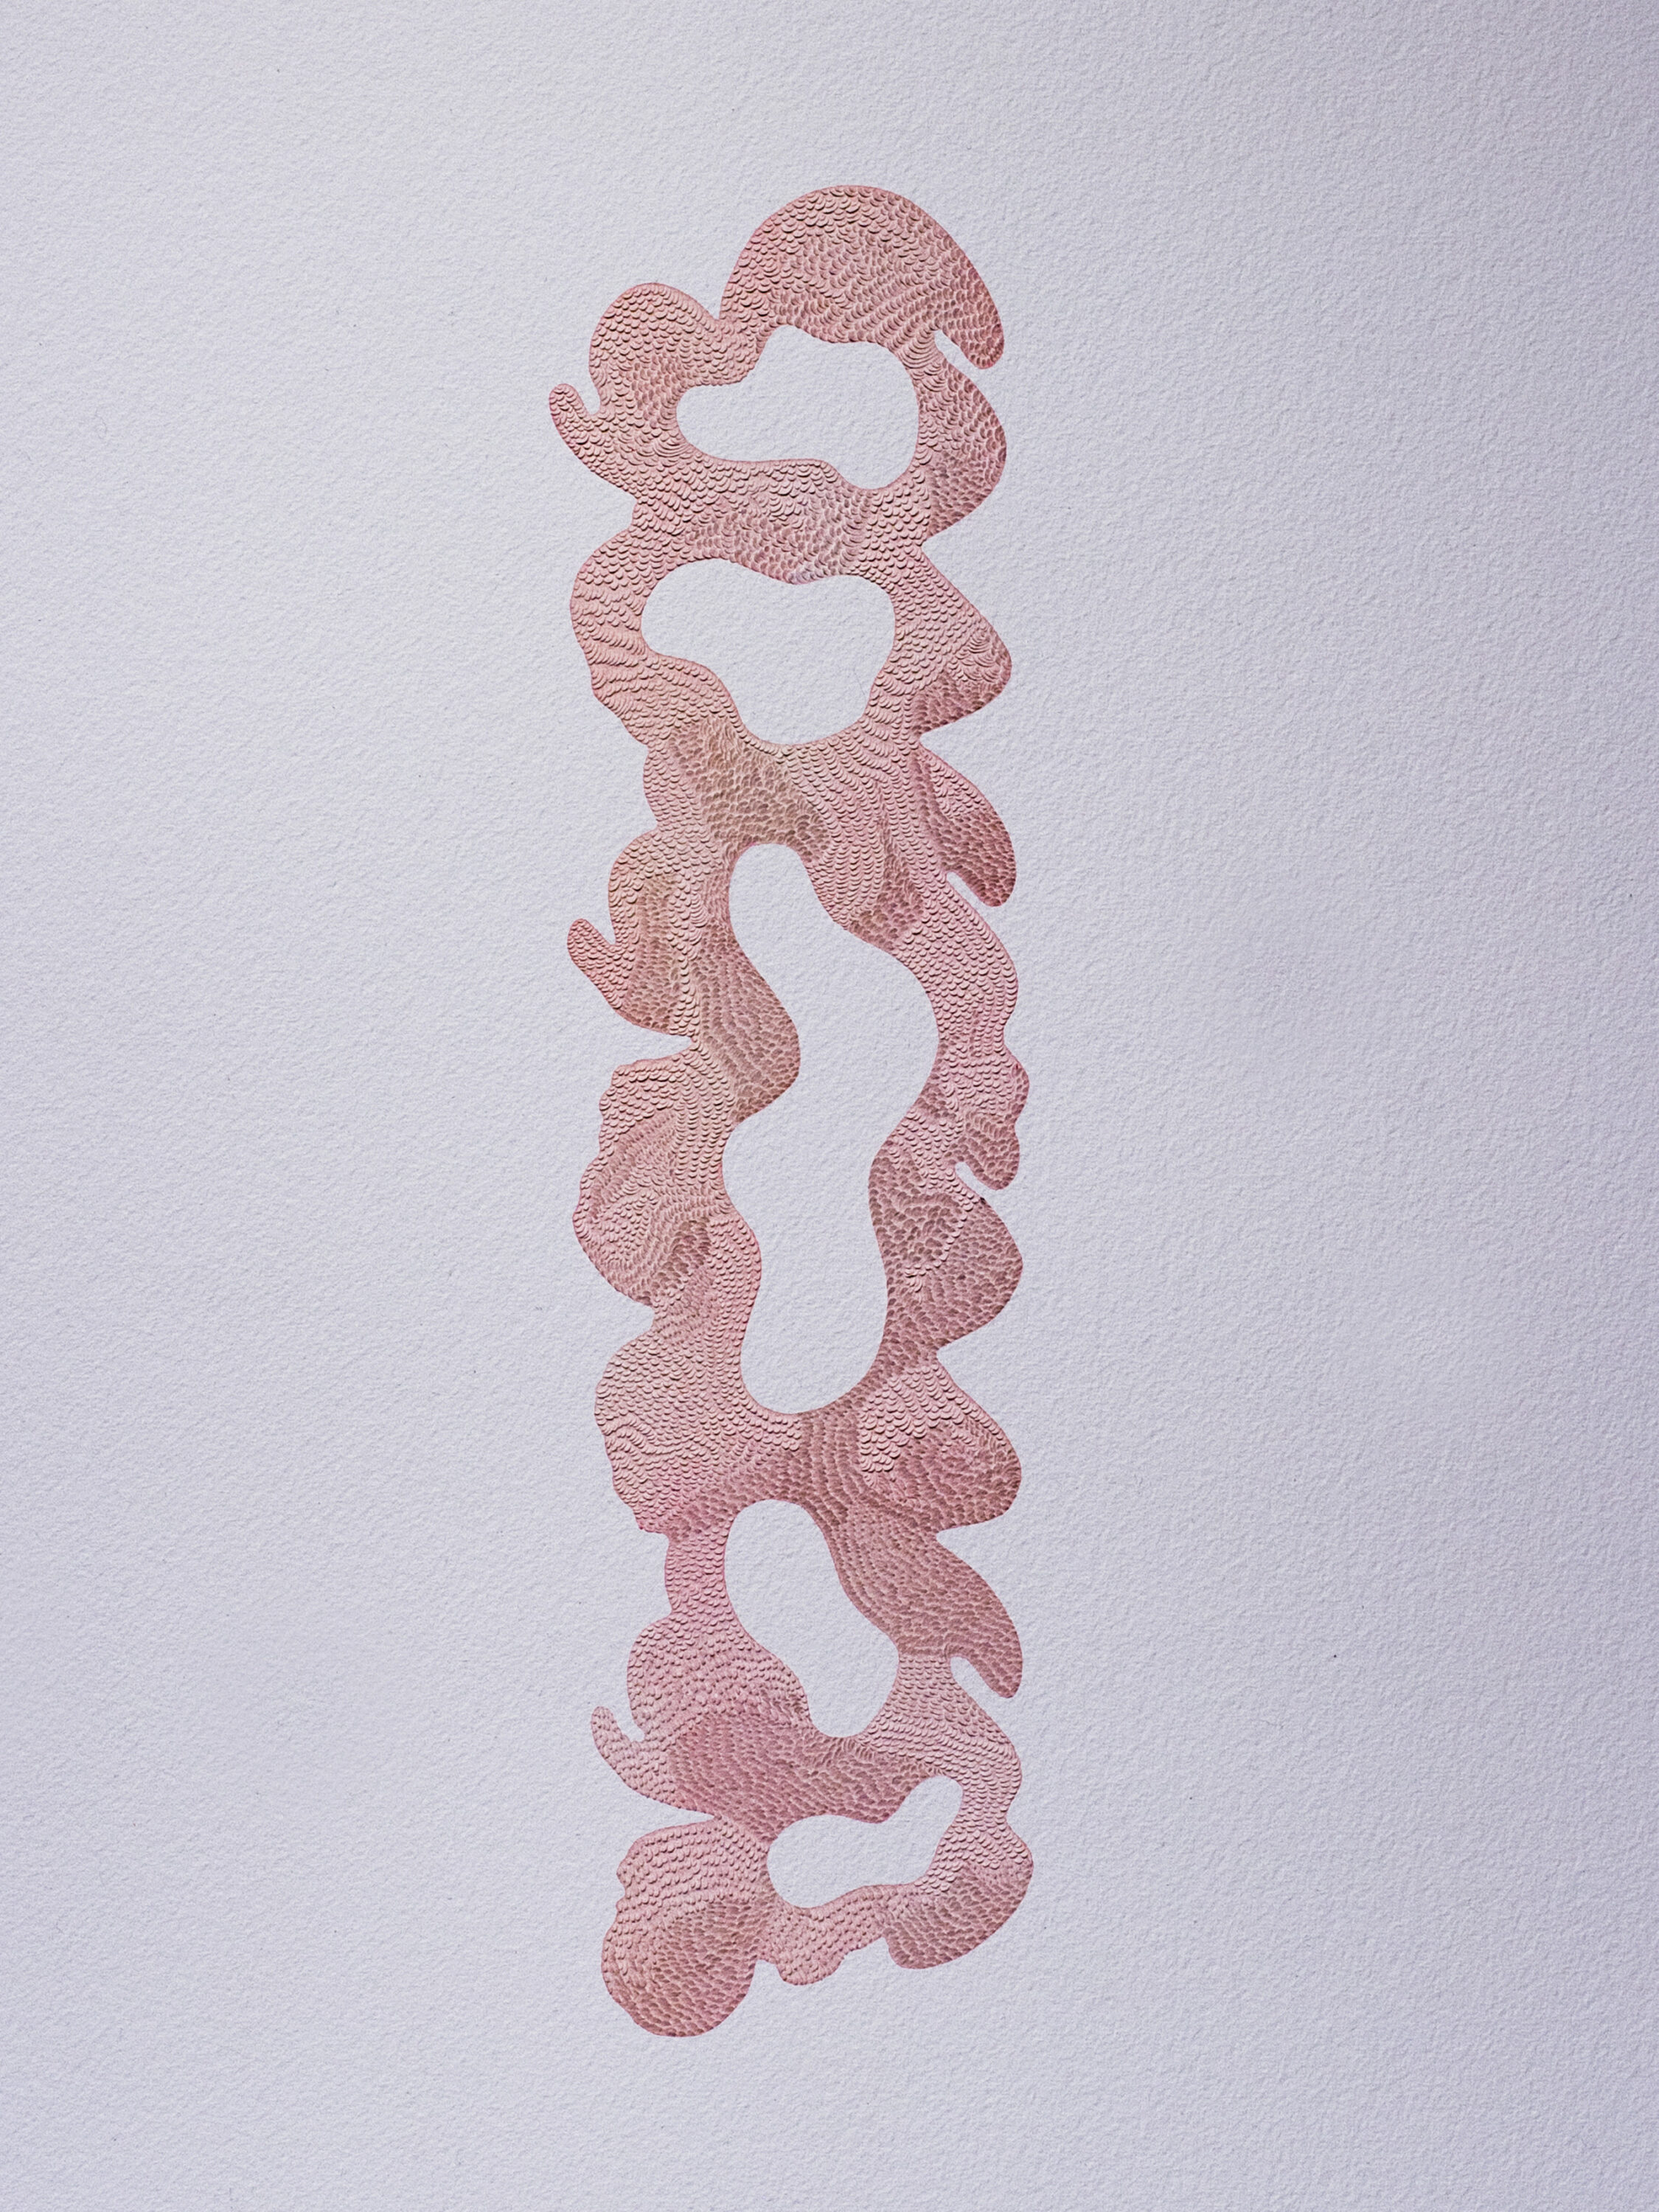 A long, vertical abstract column in a pinkish-red hue is made out of individual cuts to a piece of paper. The shape has wavy, soft, organic edges. 